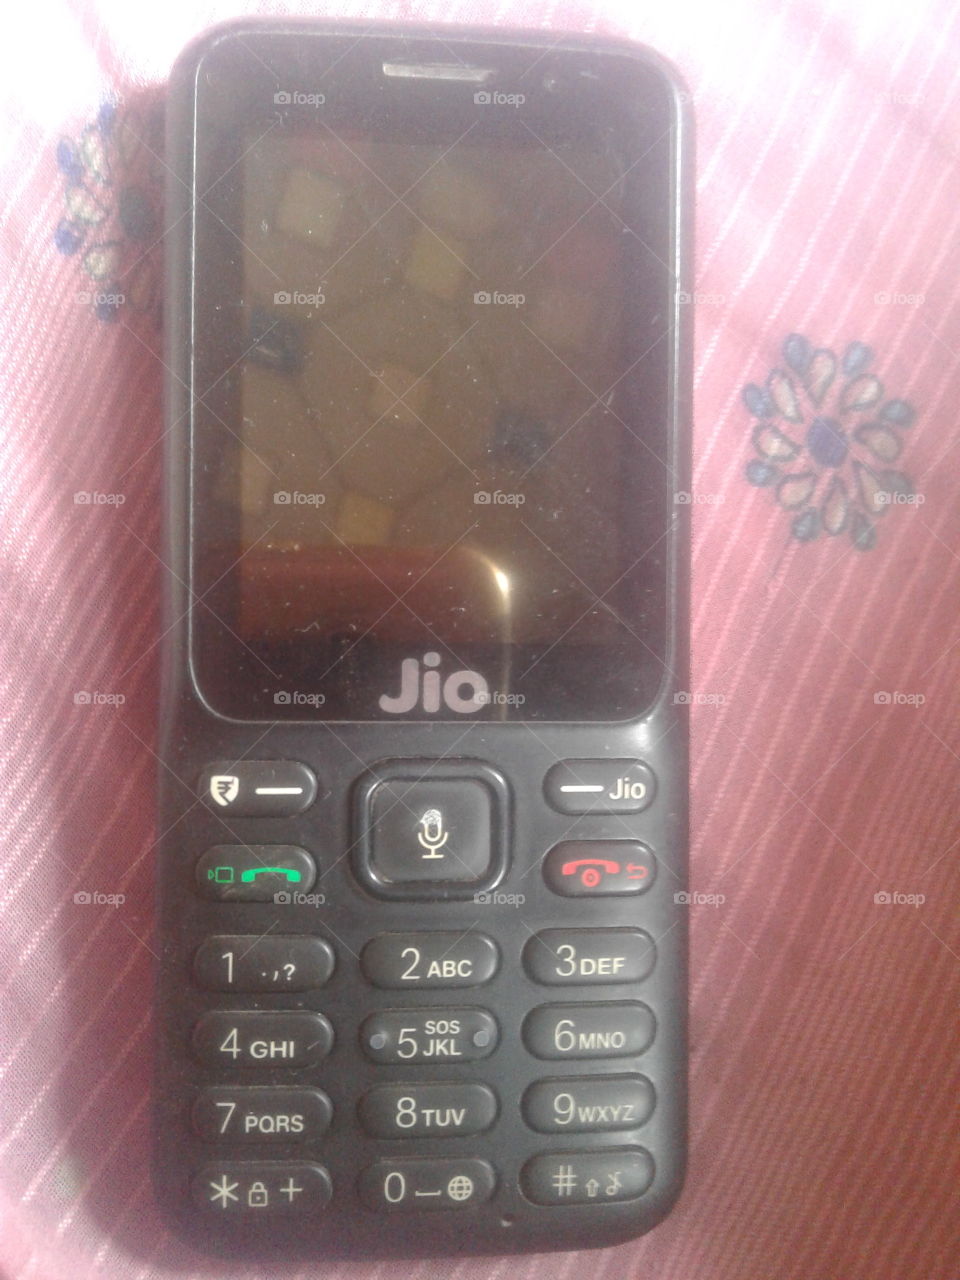 the Indian brand mobile jio